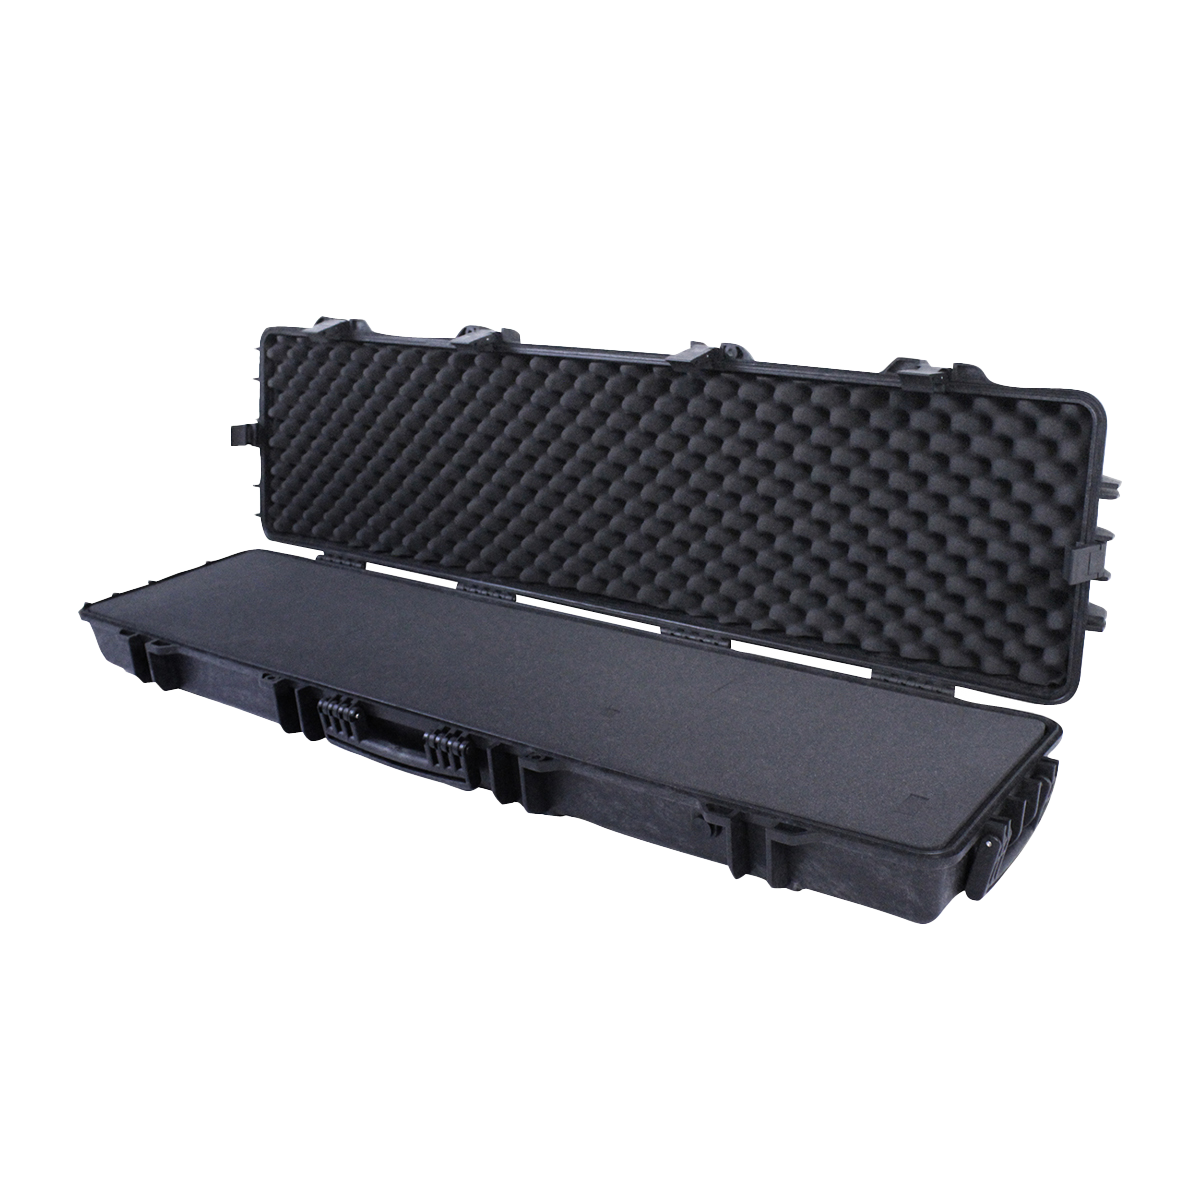 Spika Thick Plastic Double Hard Case